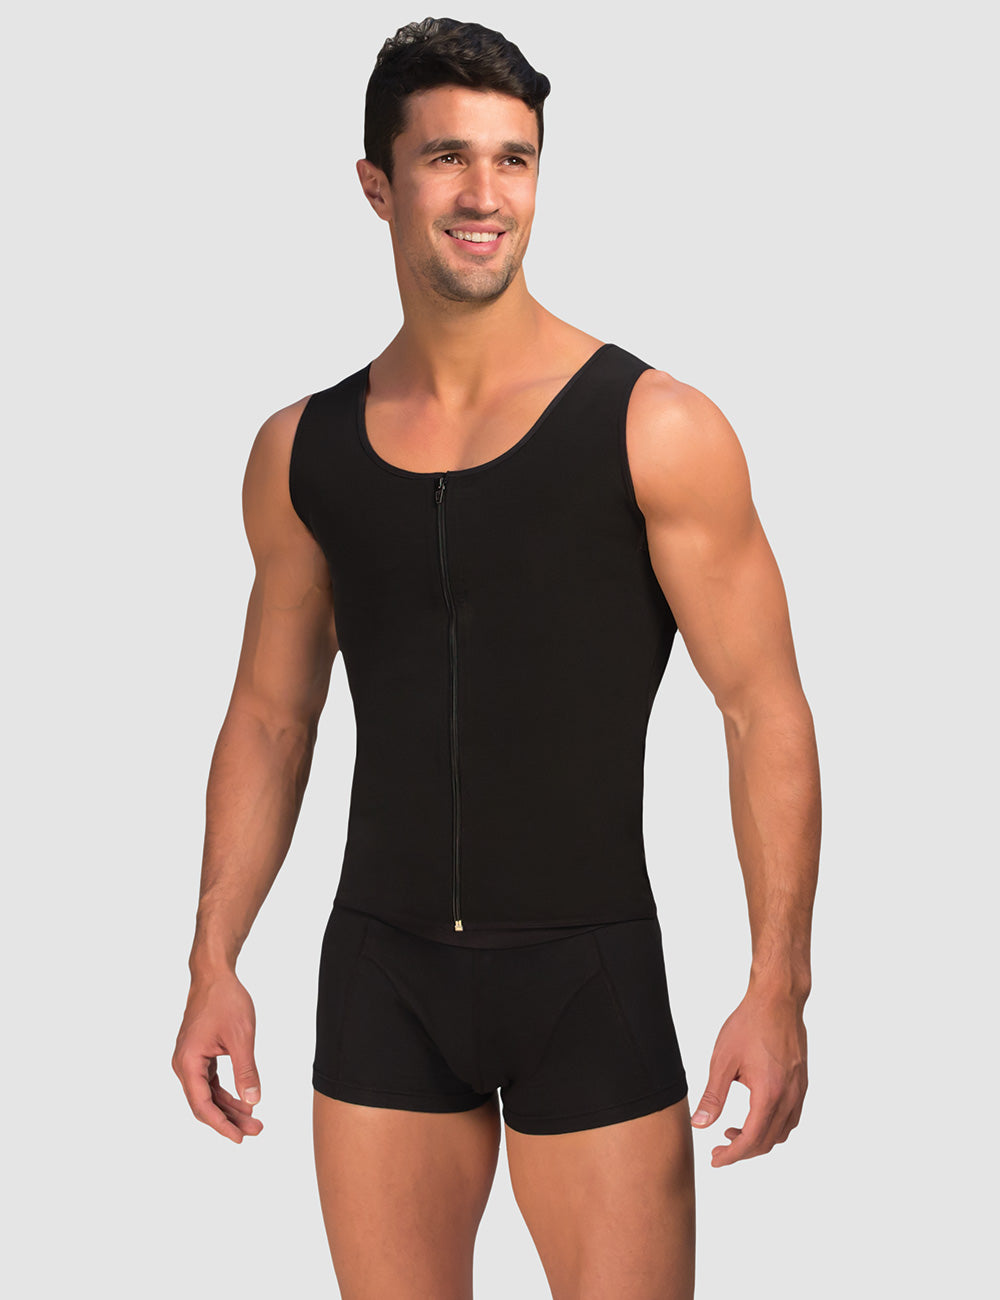 Men's Compression Body Shirt, Made in the USA